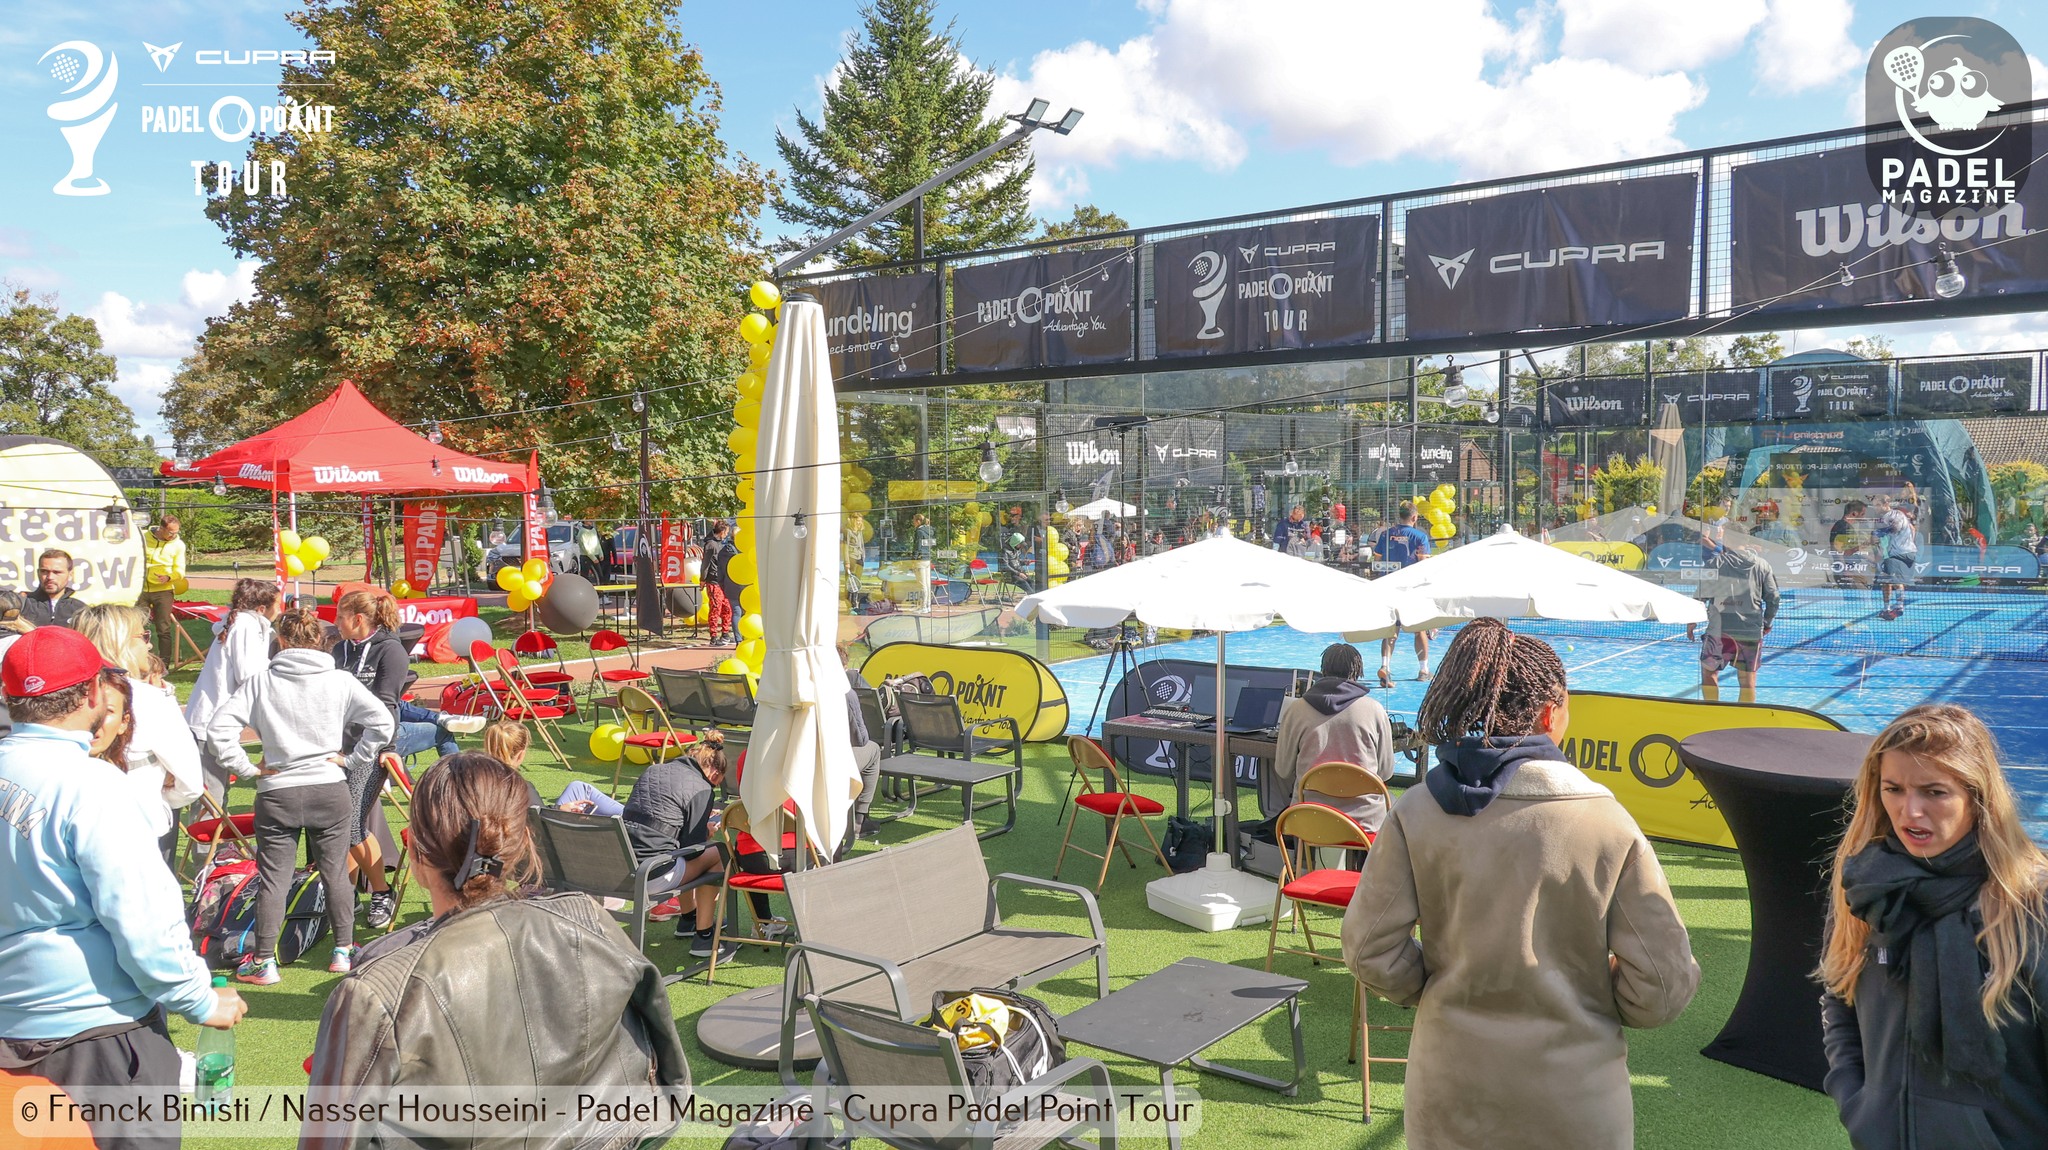 Du padel and automobiles at the Club des Pyramides for the Cupra Padel Point Tour